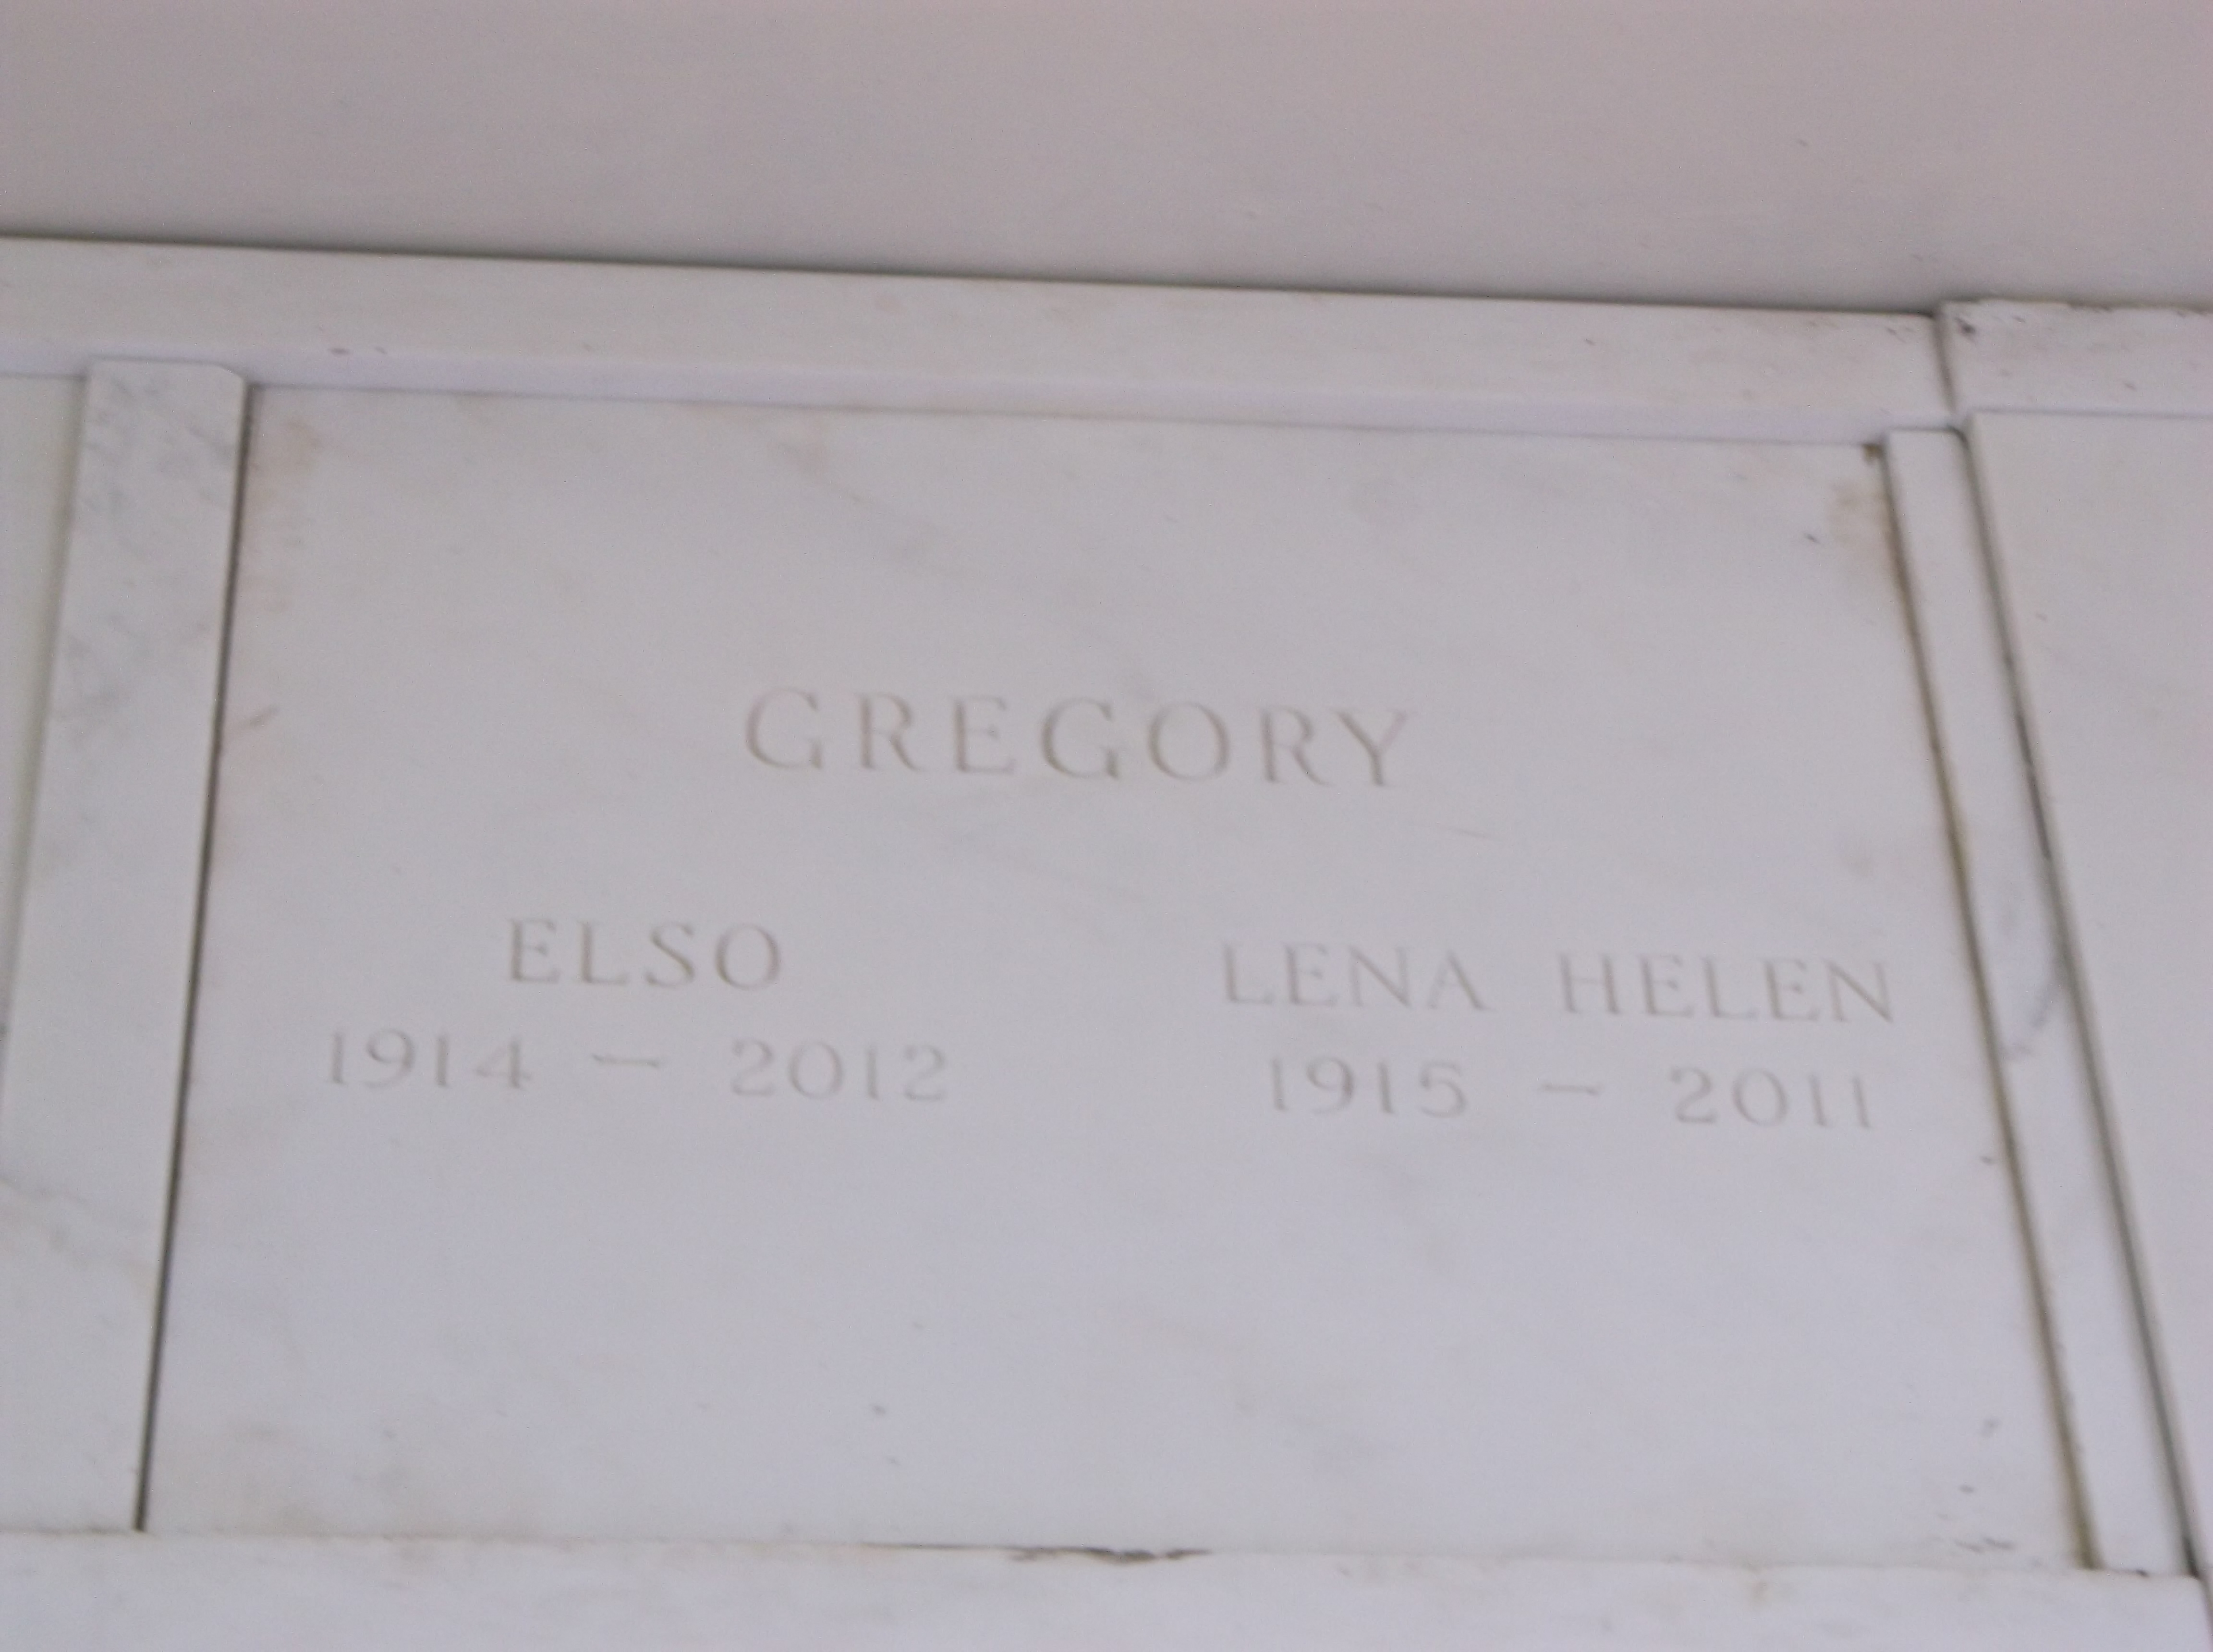 Elso Gregory